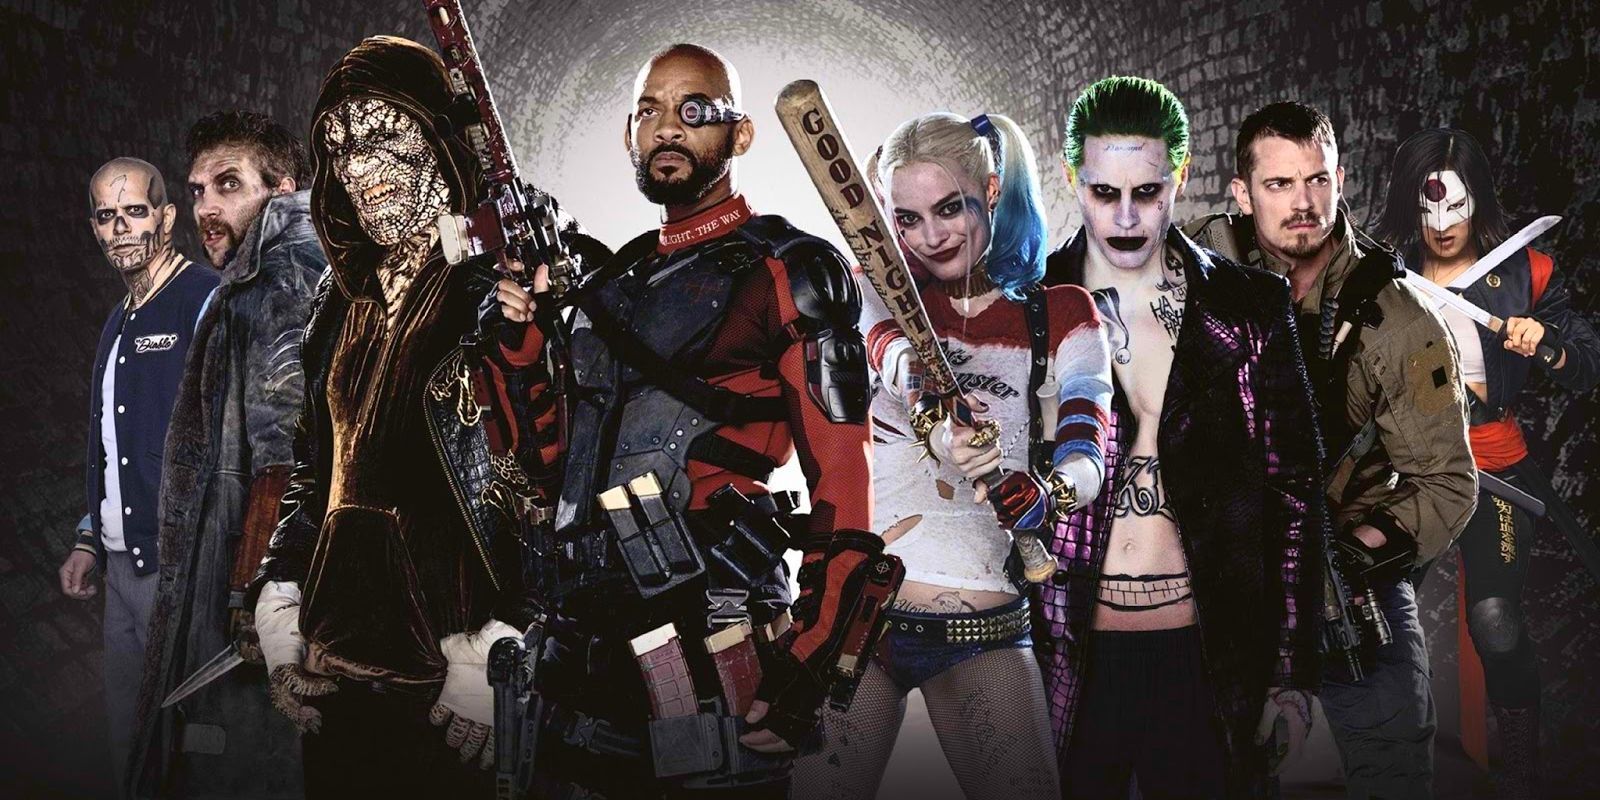 Suicide Squad International Trailer: We’re the Bad Guys